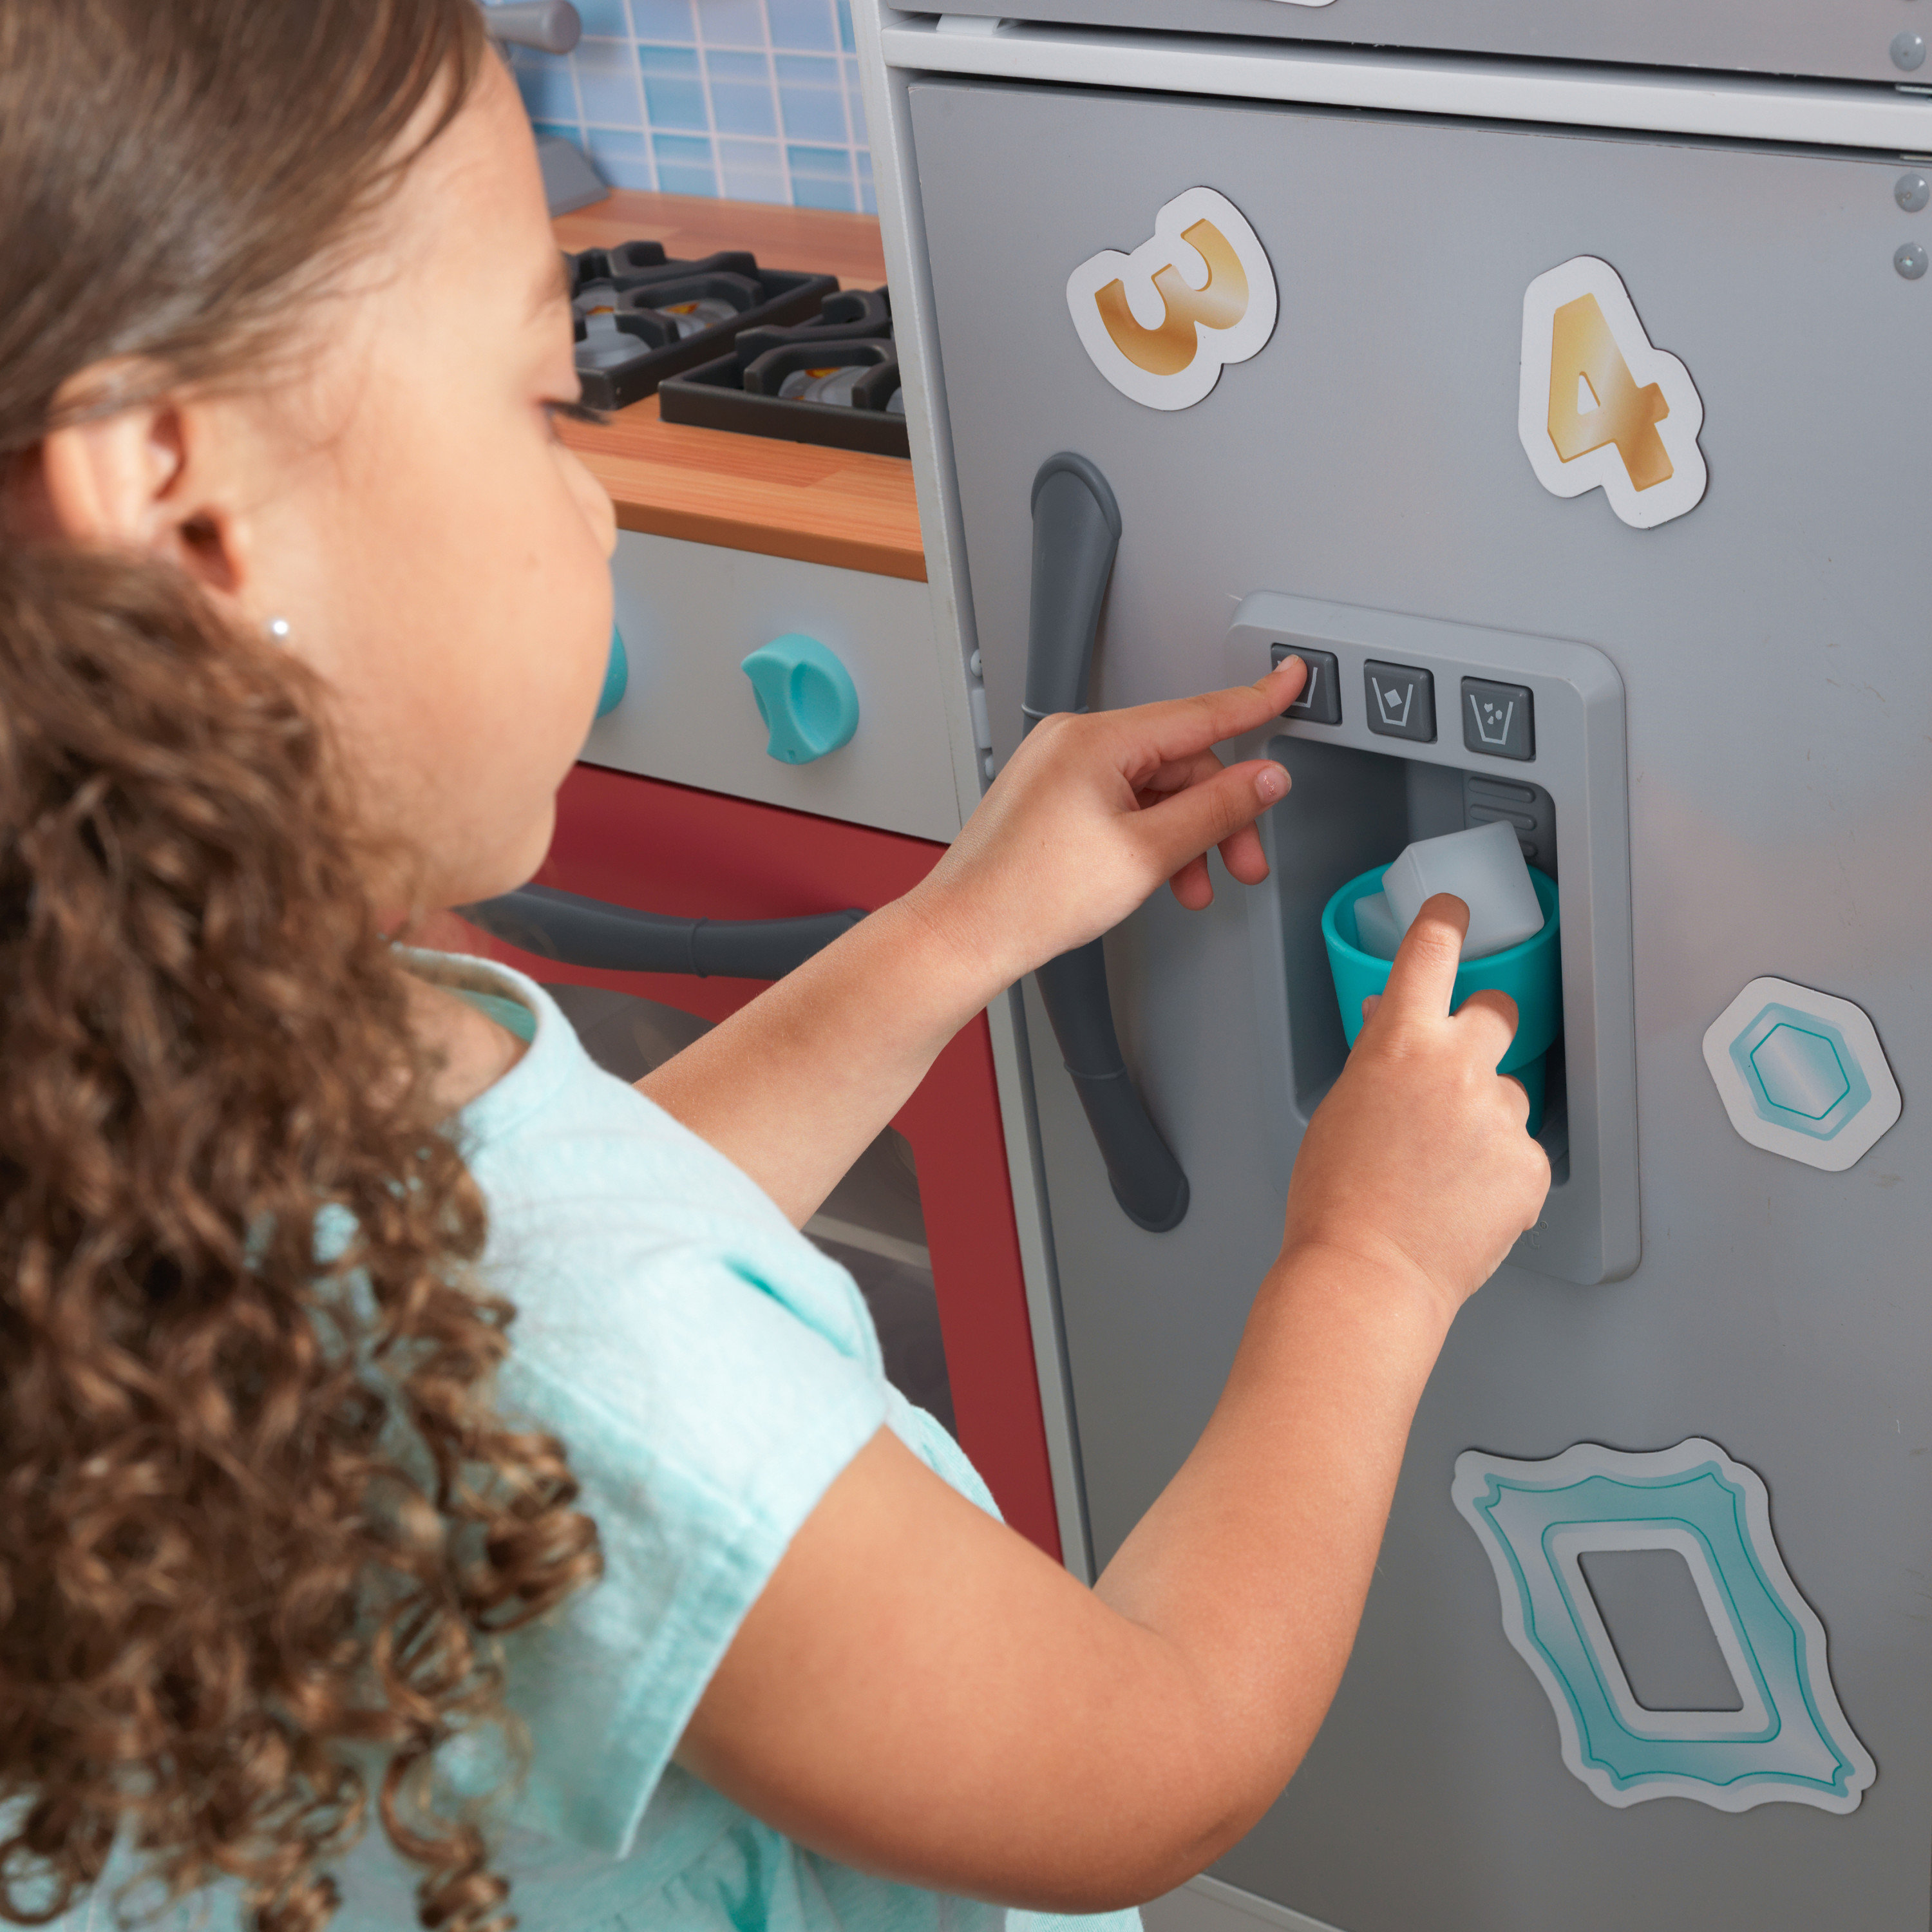 KidKraft Mosaic Magnetic Play Kitchen for Kids, Gray and Pink - image 2 of 12